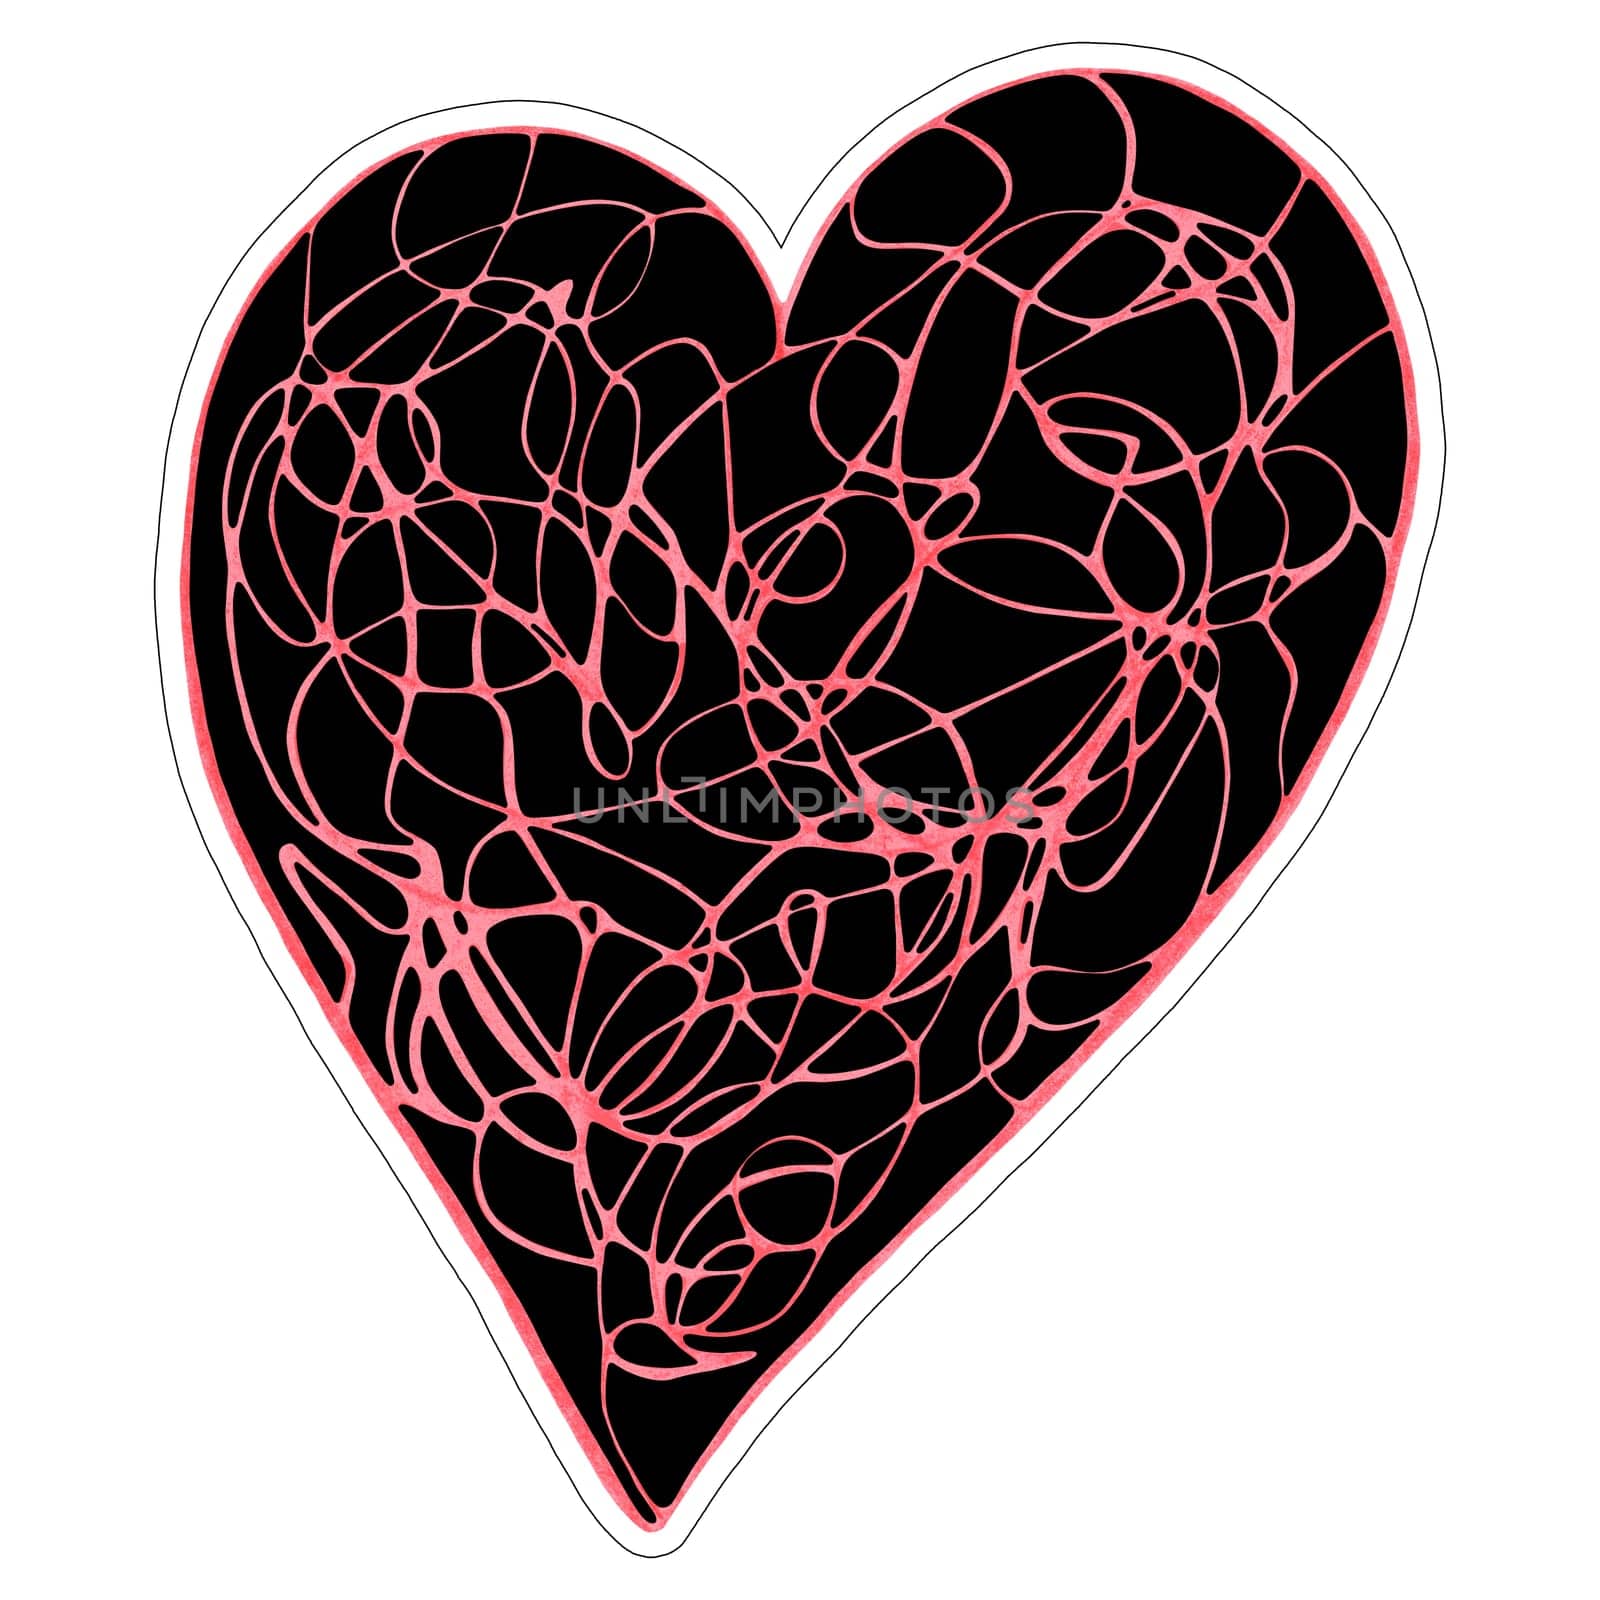 Red and Black Heart Sticker Drawn by Colored Pencil. The Sign of World Heart Day. Symbol of Valentines Day. Heart Shape Isolated on White Background.